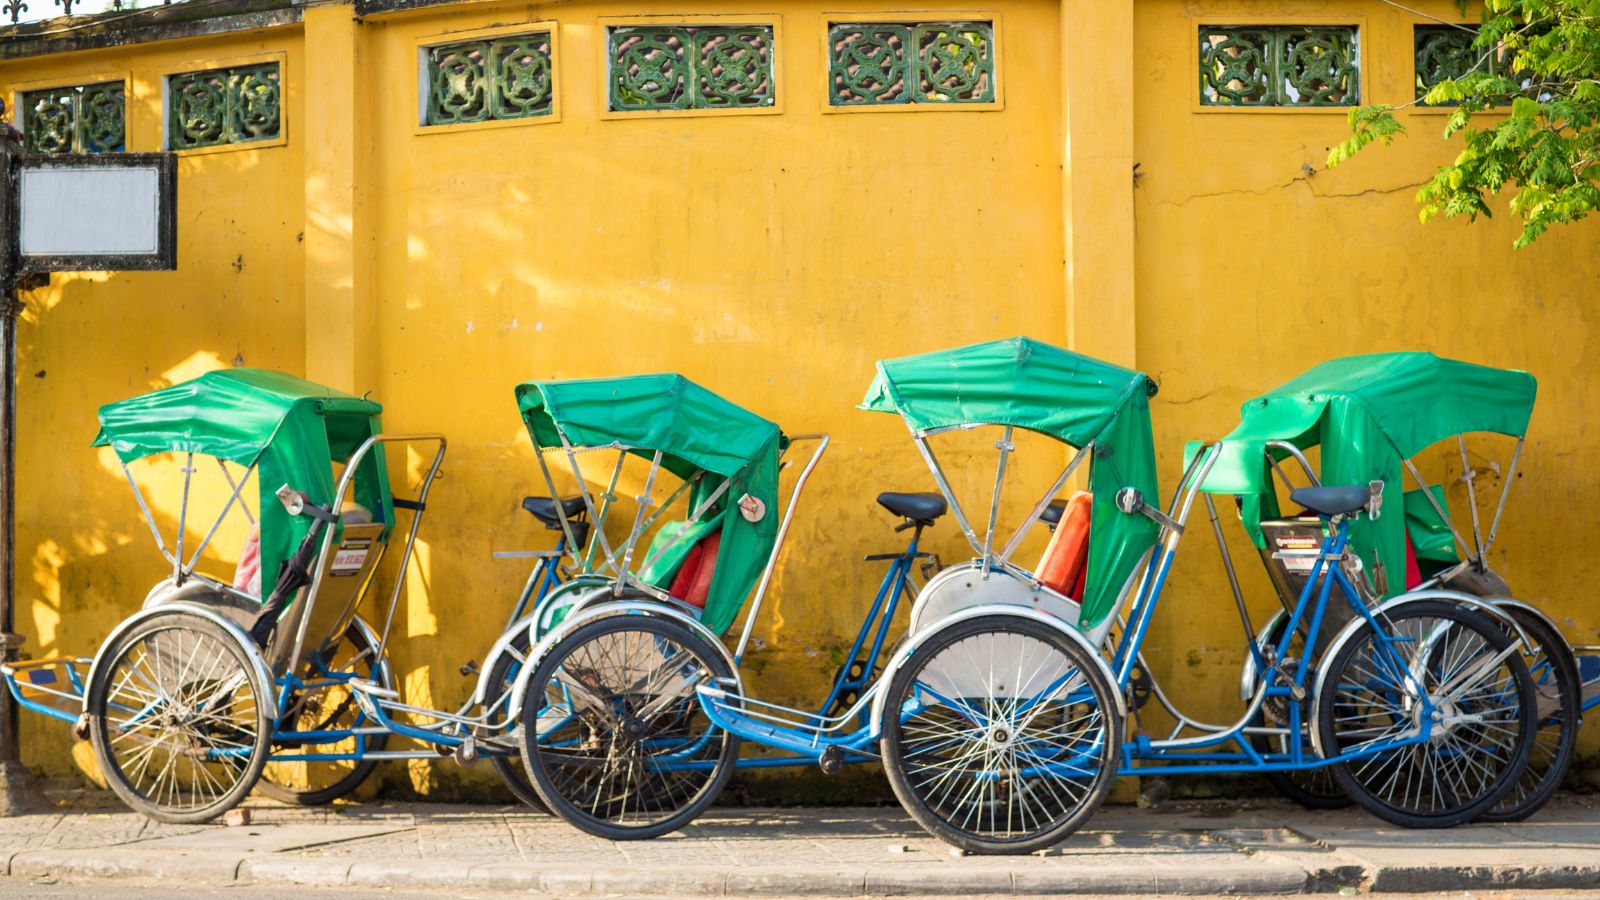 Cyclo Is A Special Transportation Of Tranquil Hoi An